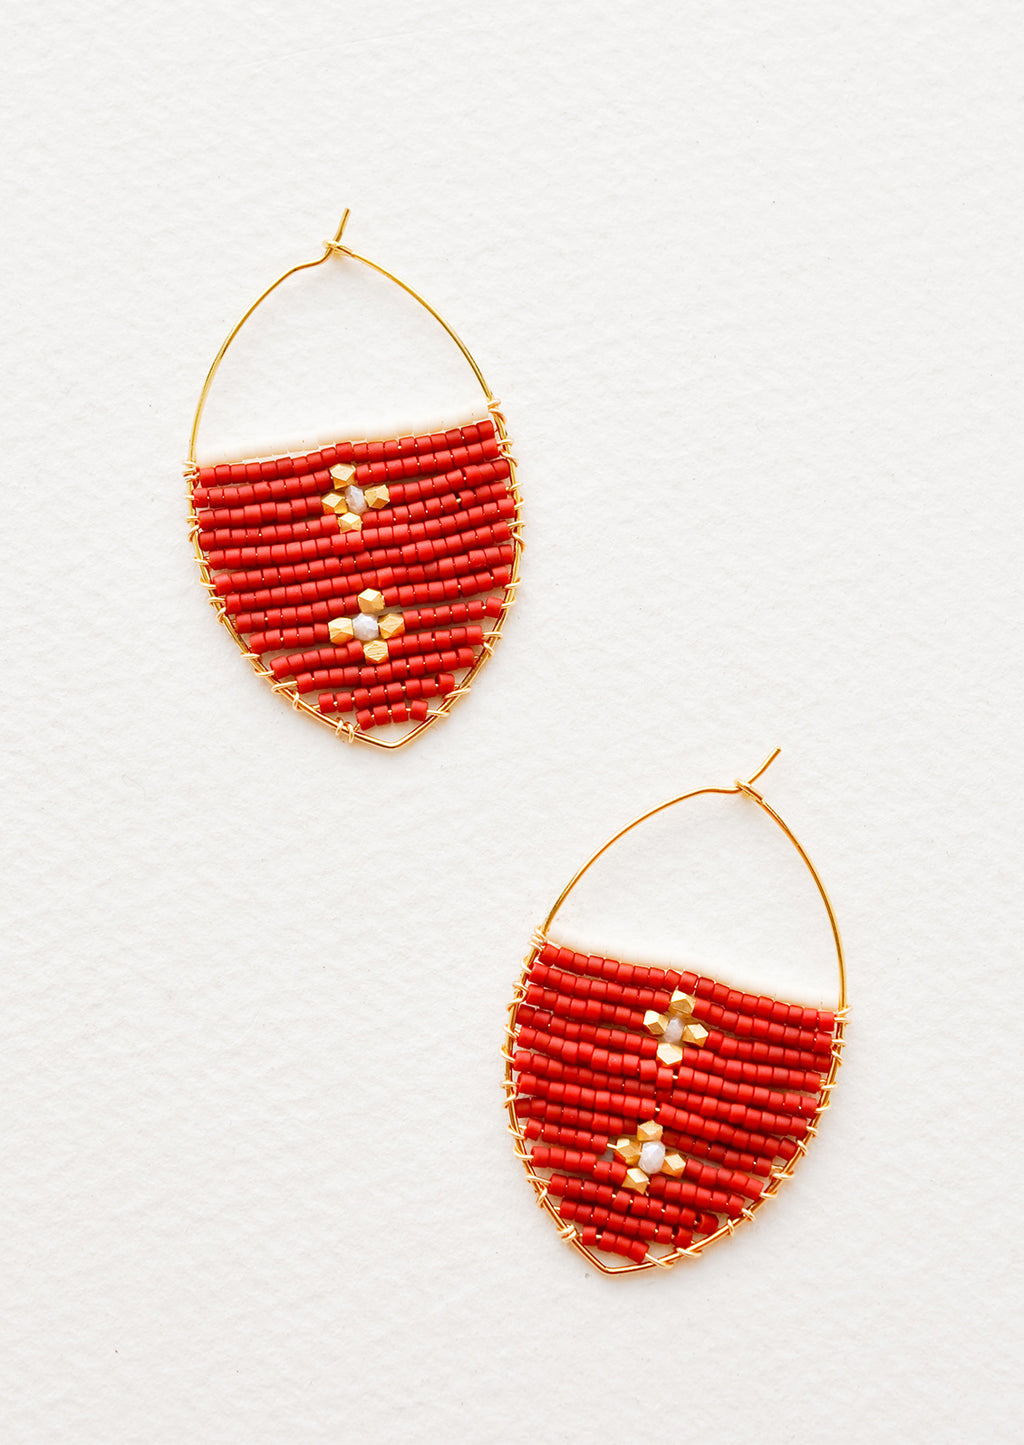 Crimson: Delicate gold drop earrings with a field of red glass beads featuring two gold equal-armed crosses.